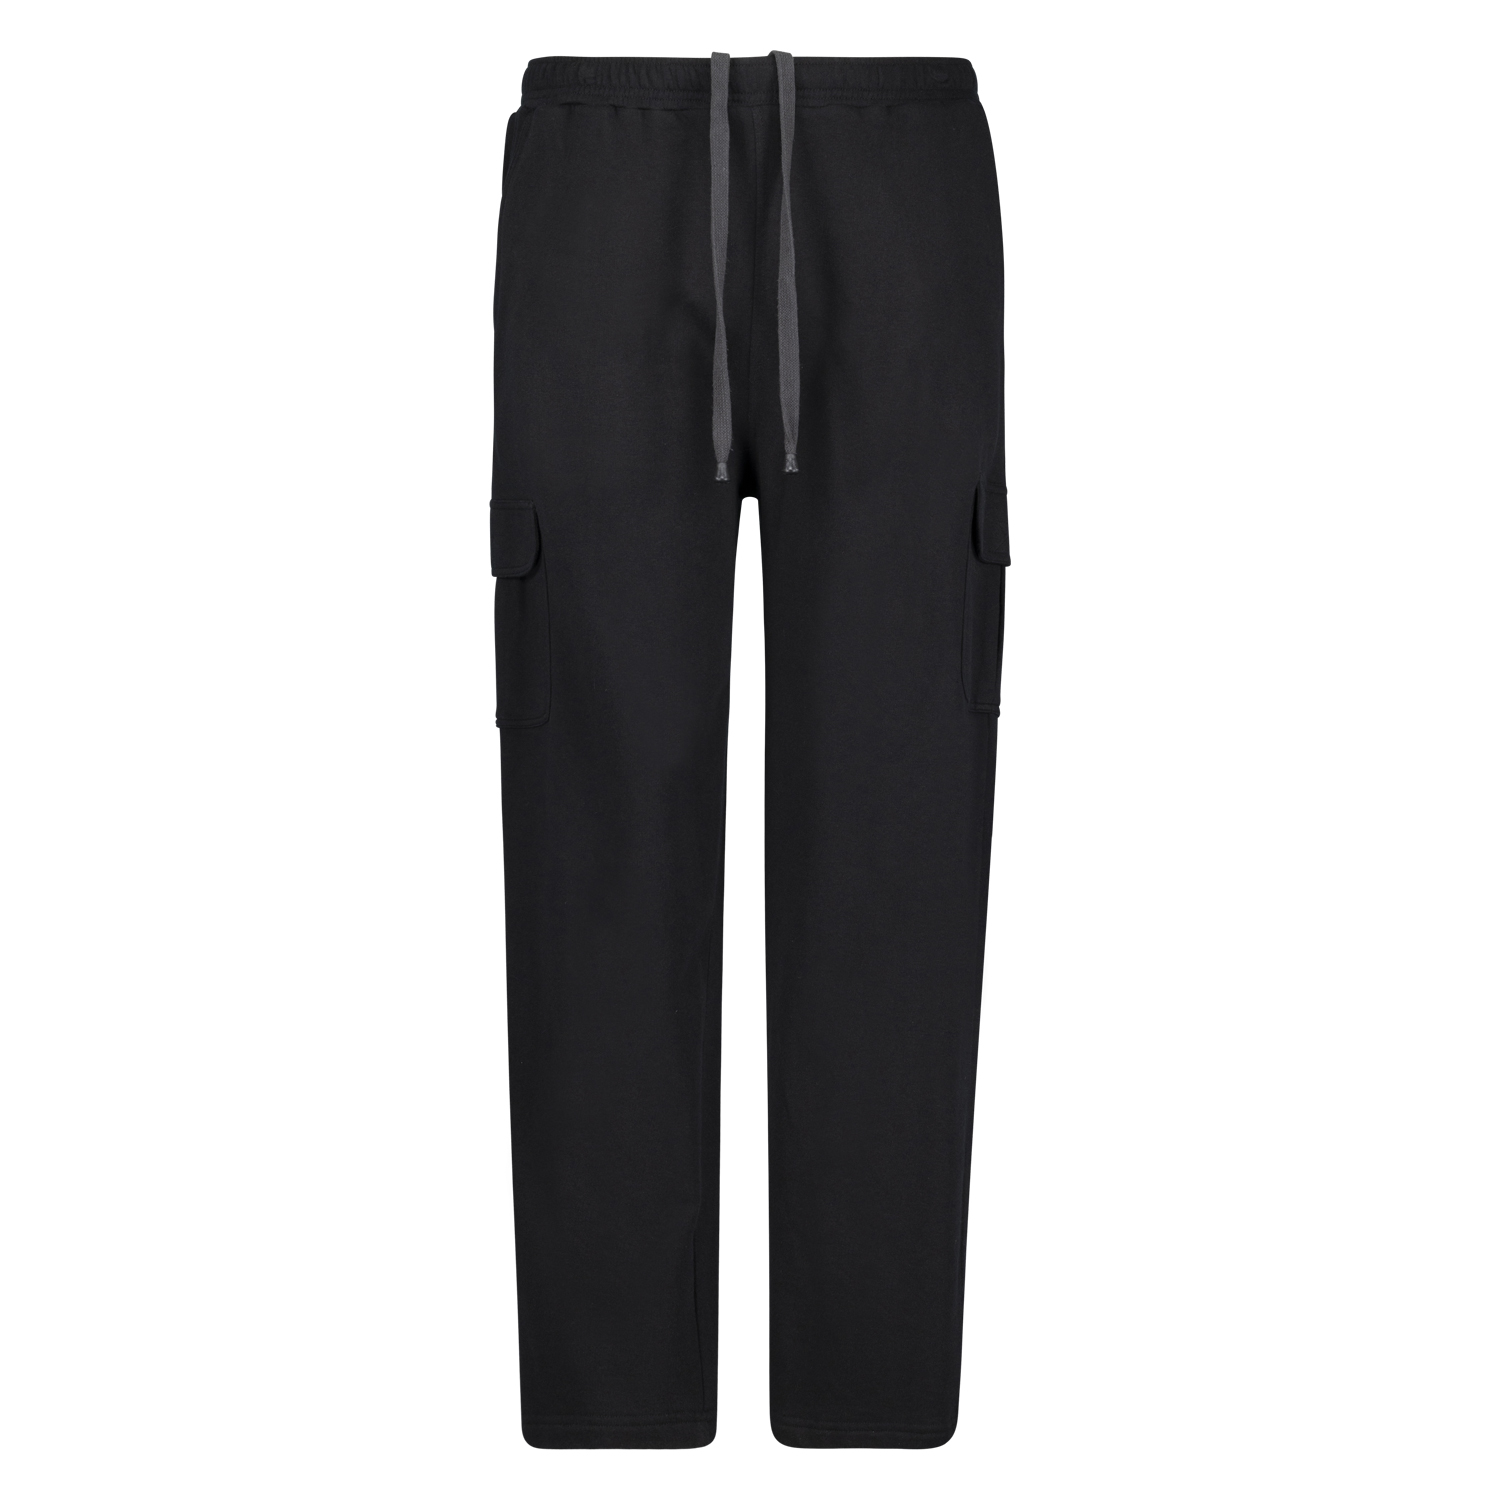 Long men's sweatpants from the series Athens by Adamo in oversizes up to 14XL//5XLT